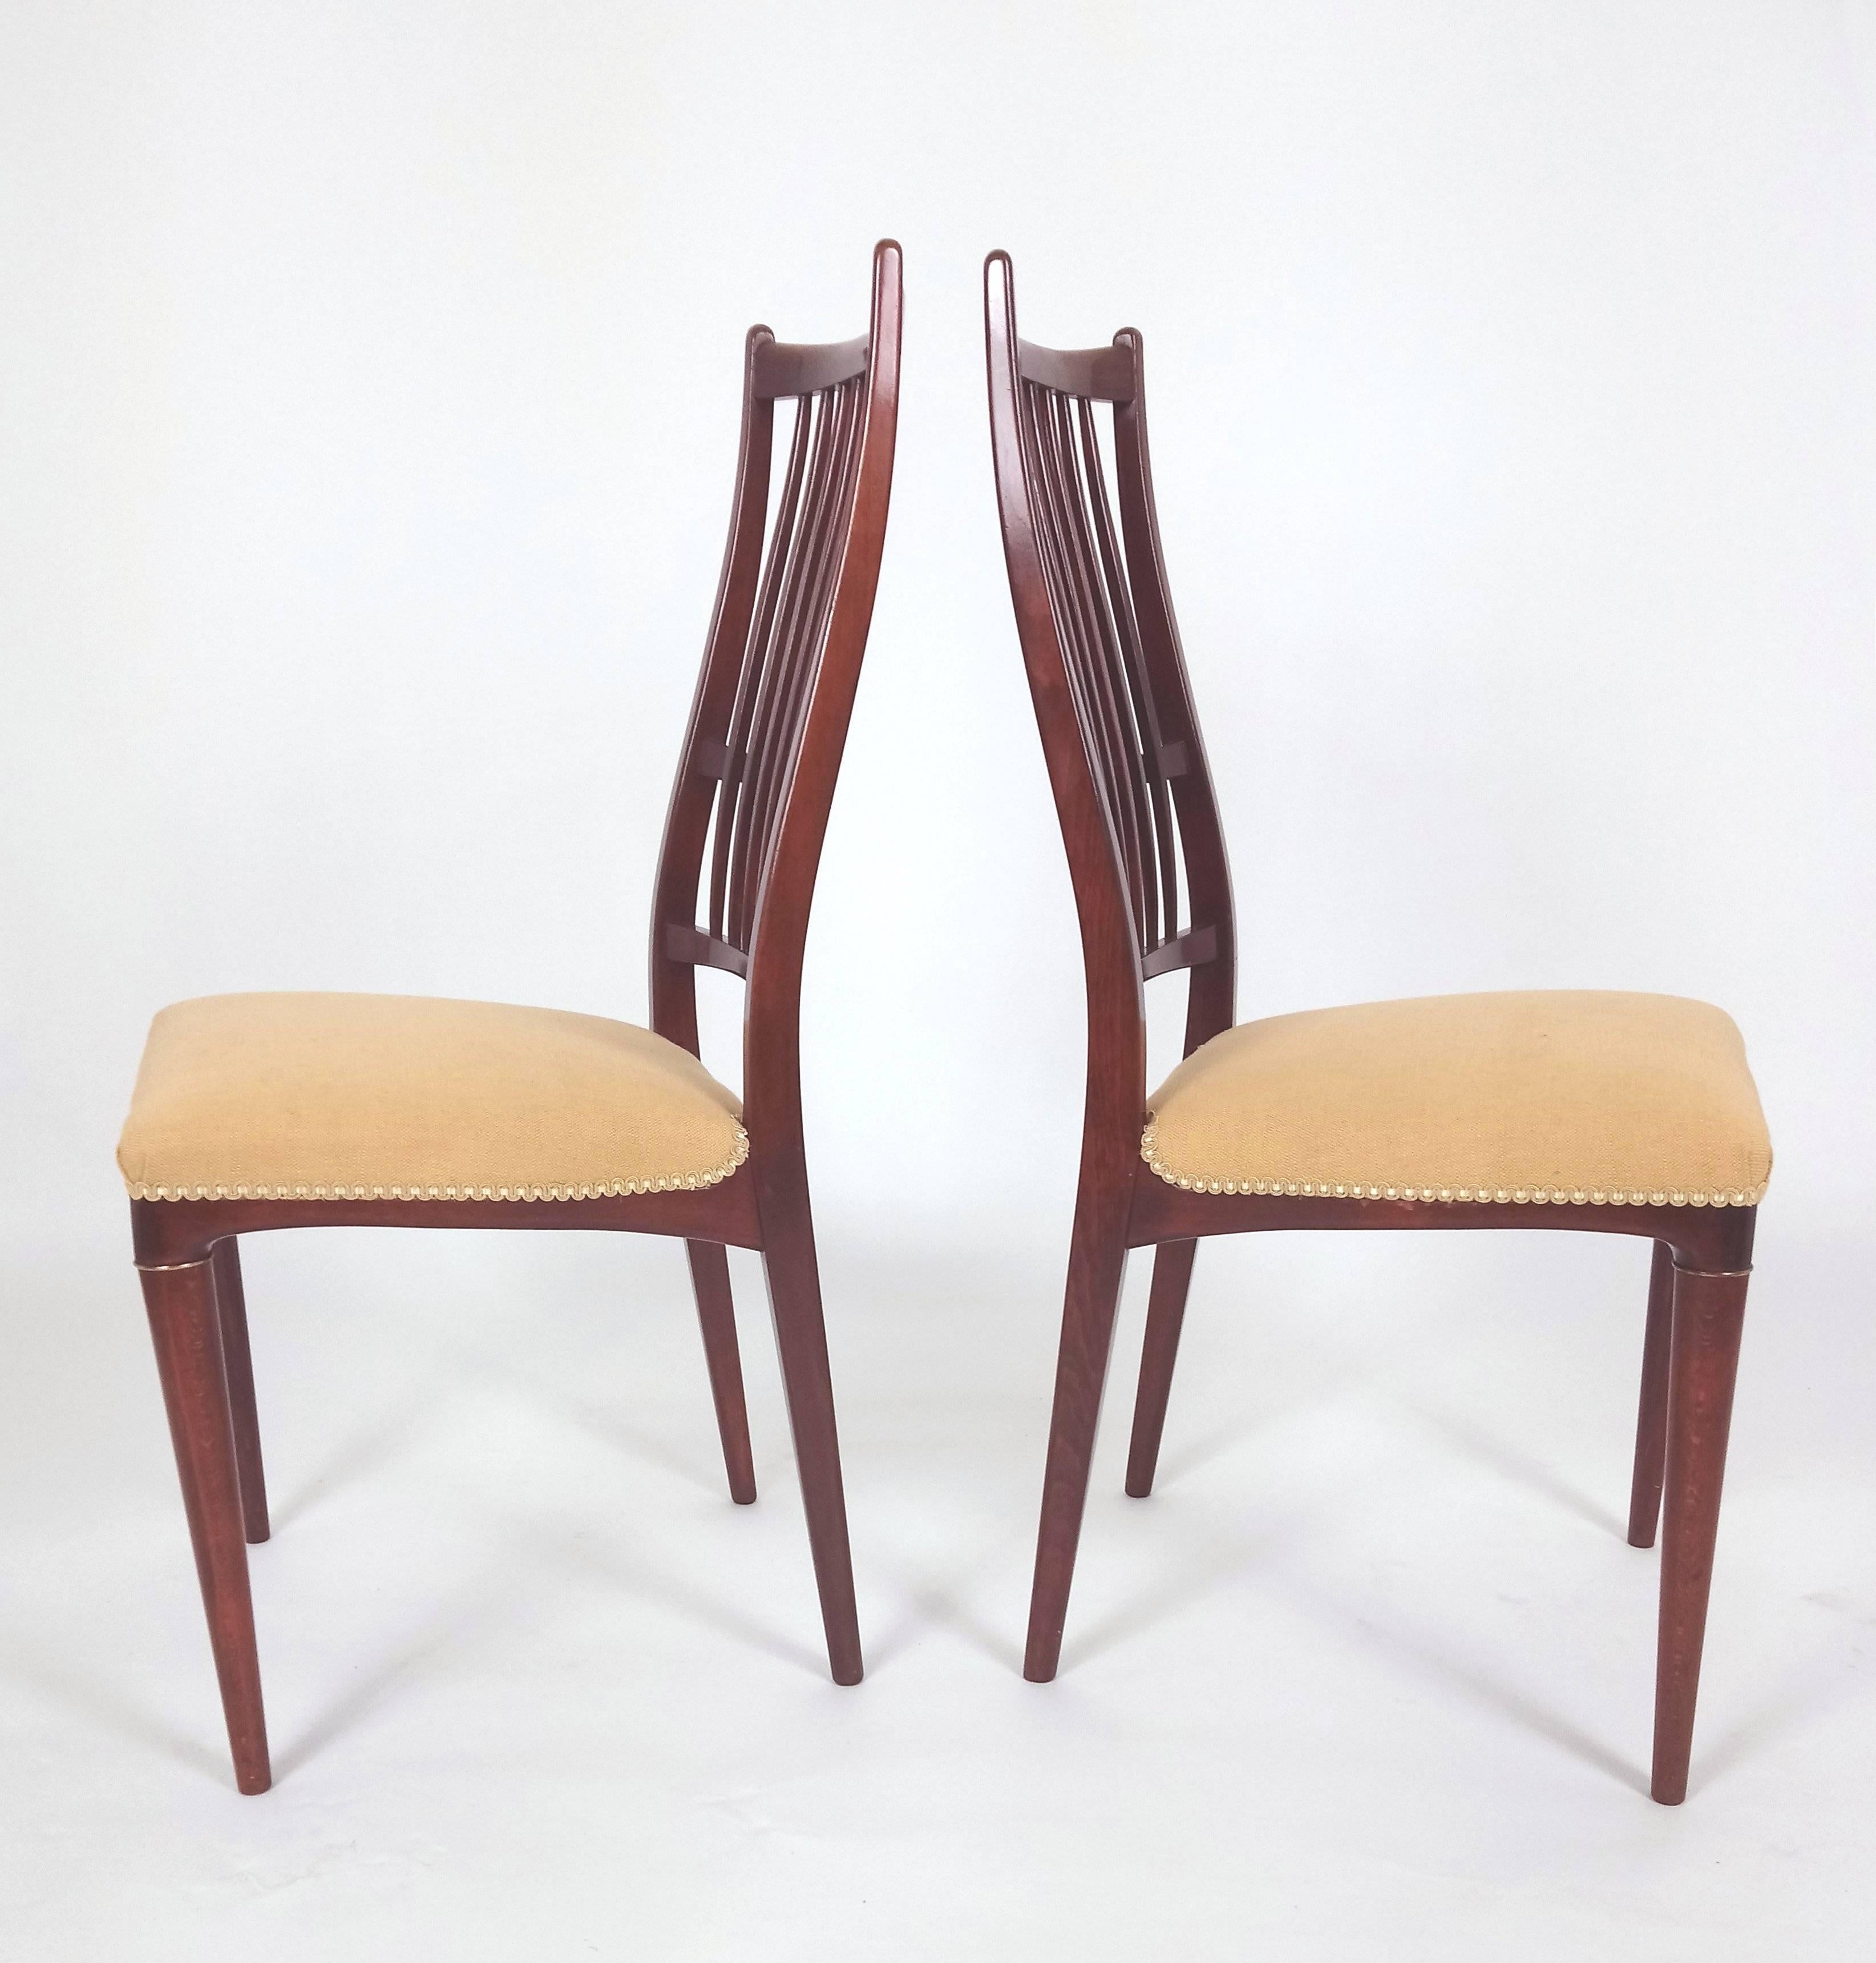 Brass Pair of Mid-20th Century Swedish Beech Side Chairs